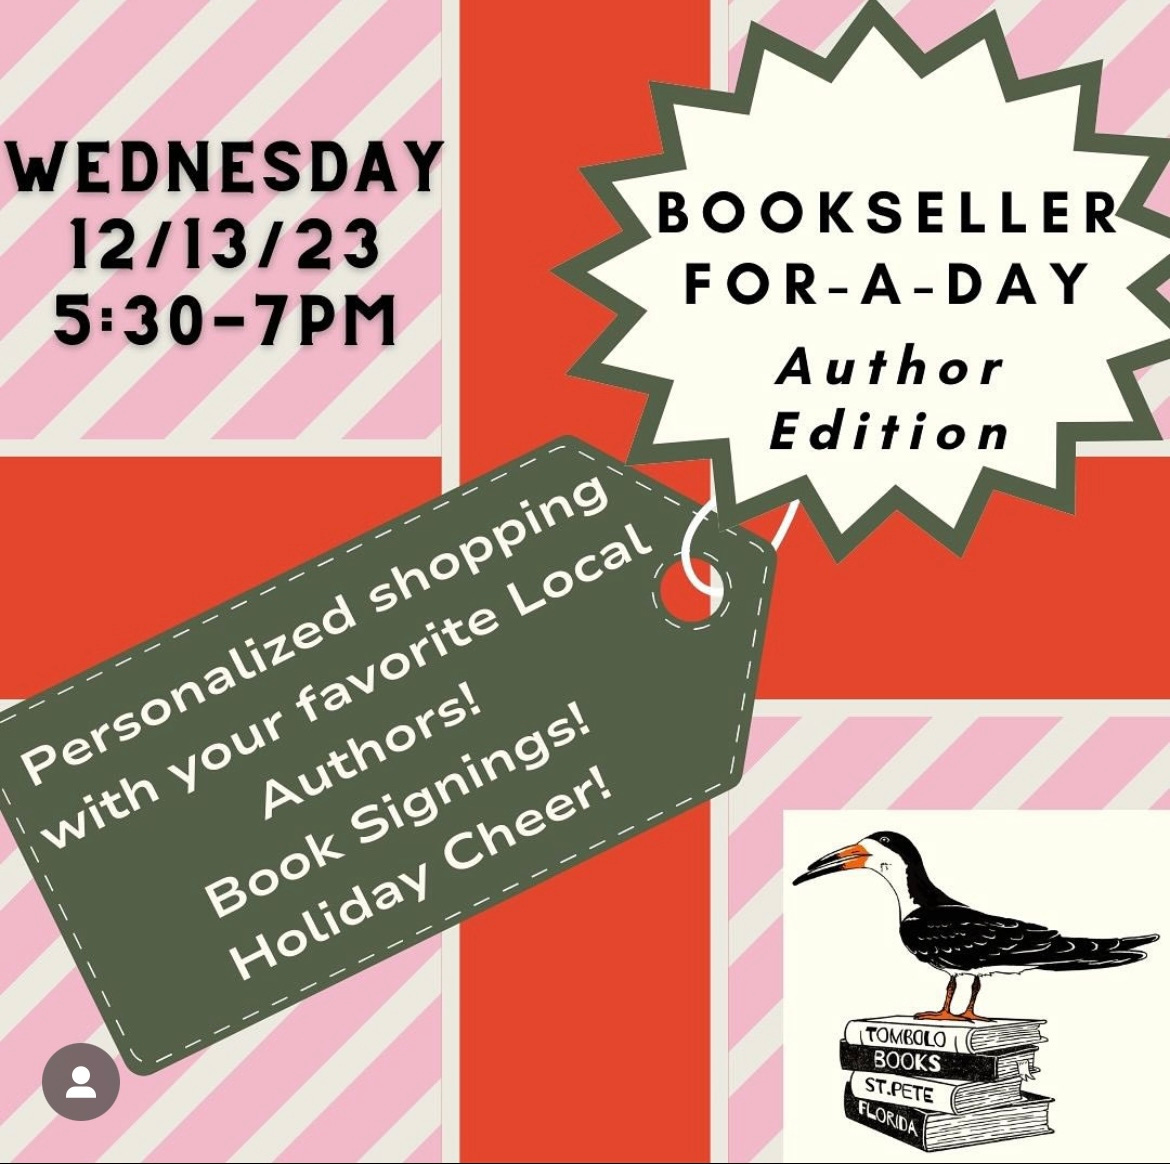 Graphic showing cute wrapped present type image that says "Wednesday 12/13/23 5:30-7pm, and then "Bookseller For-a-Day Author Edition" and then a tag that says "Personalized shopping with your favorite Local Authors! Book Signings! Holiday Cheer!" and then in the lower right corner is the little Tombolo logo of the bird on top of a stack of books with spines spelling out Tombolo Books St. Pete Florida.